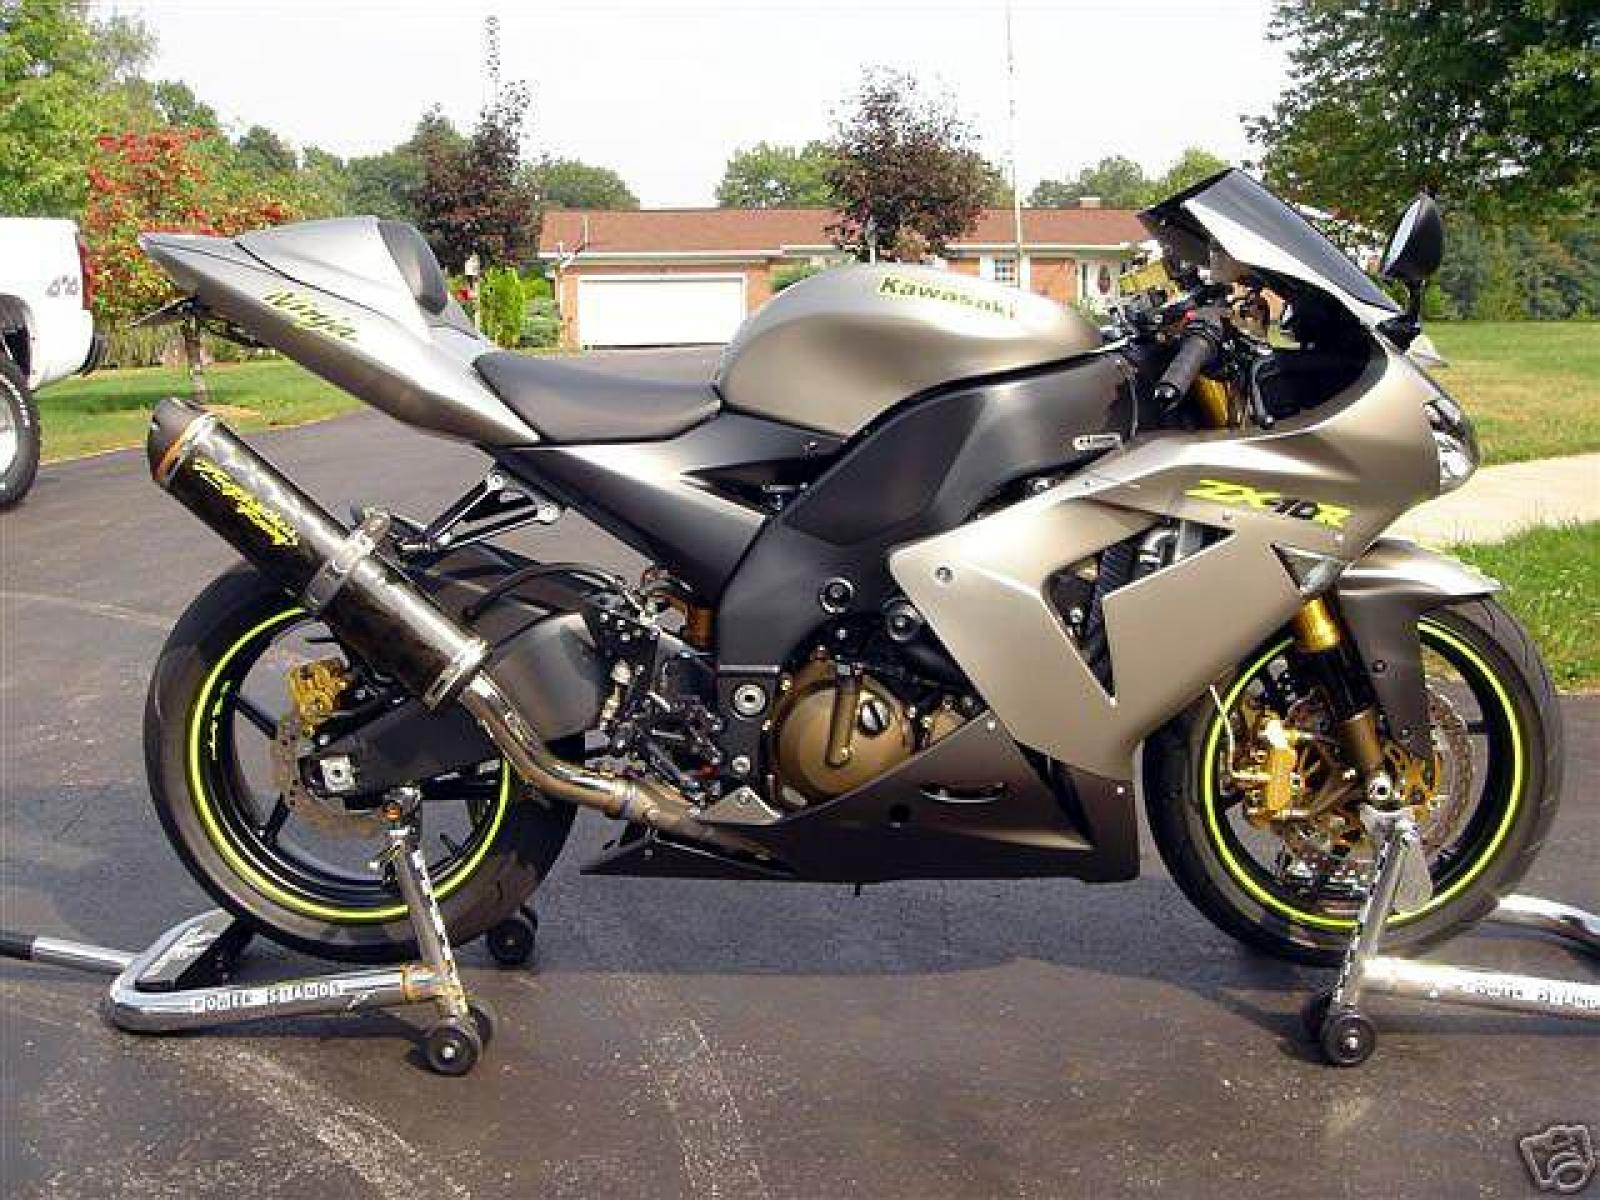 Kawasaki Zx 10r 2004 2005 Review Specs Prices Mcn